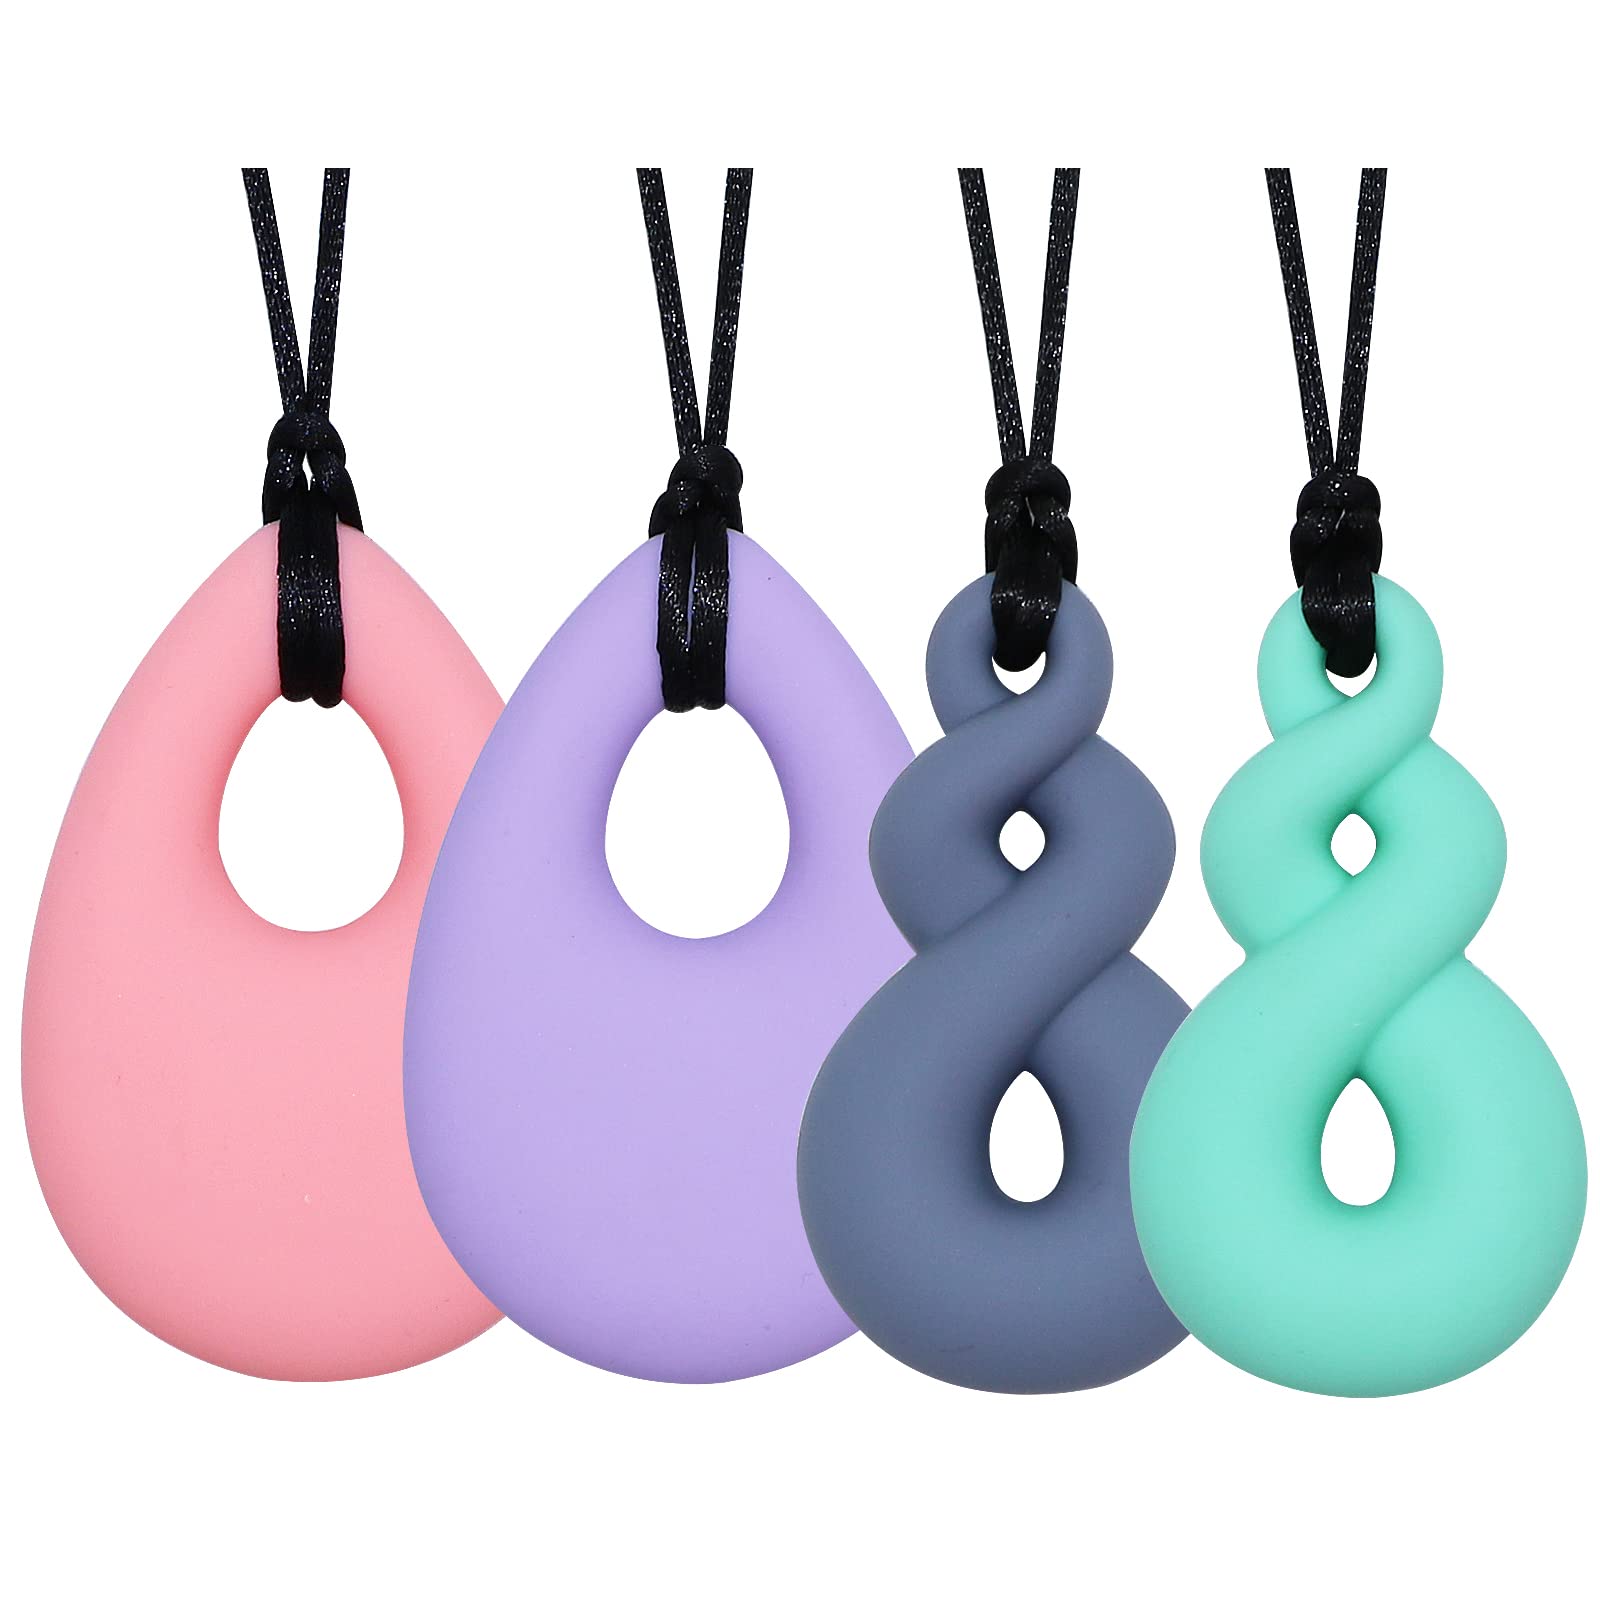 Buy Chew Necklaces for Sensory Kids, Silicone Chewy Necklace Sensory Stim  Toy for Girls Boys, 6 Pack Sensory Chew Toys for Kids Teens Adults with  Autism Anxiety ADHD SPD or Other Sensory